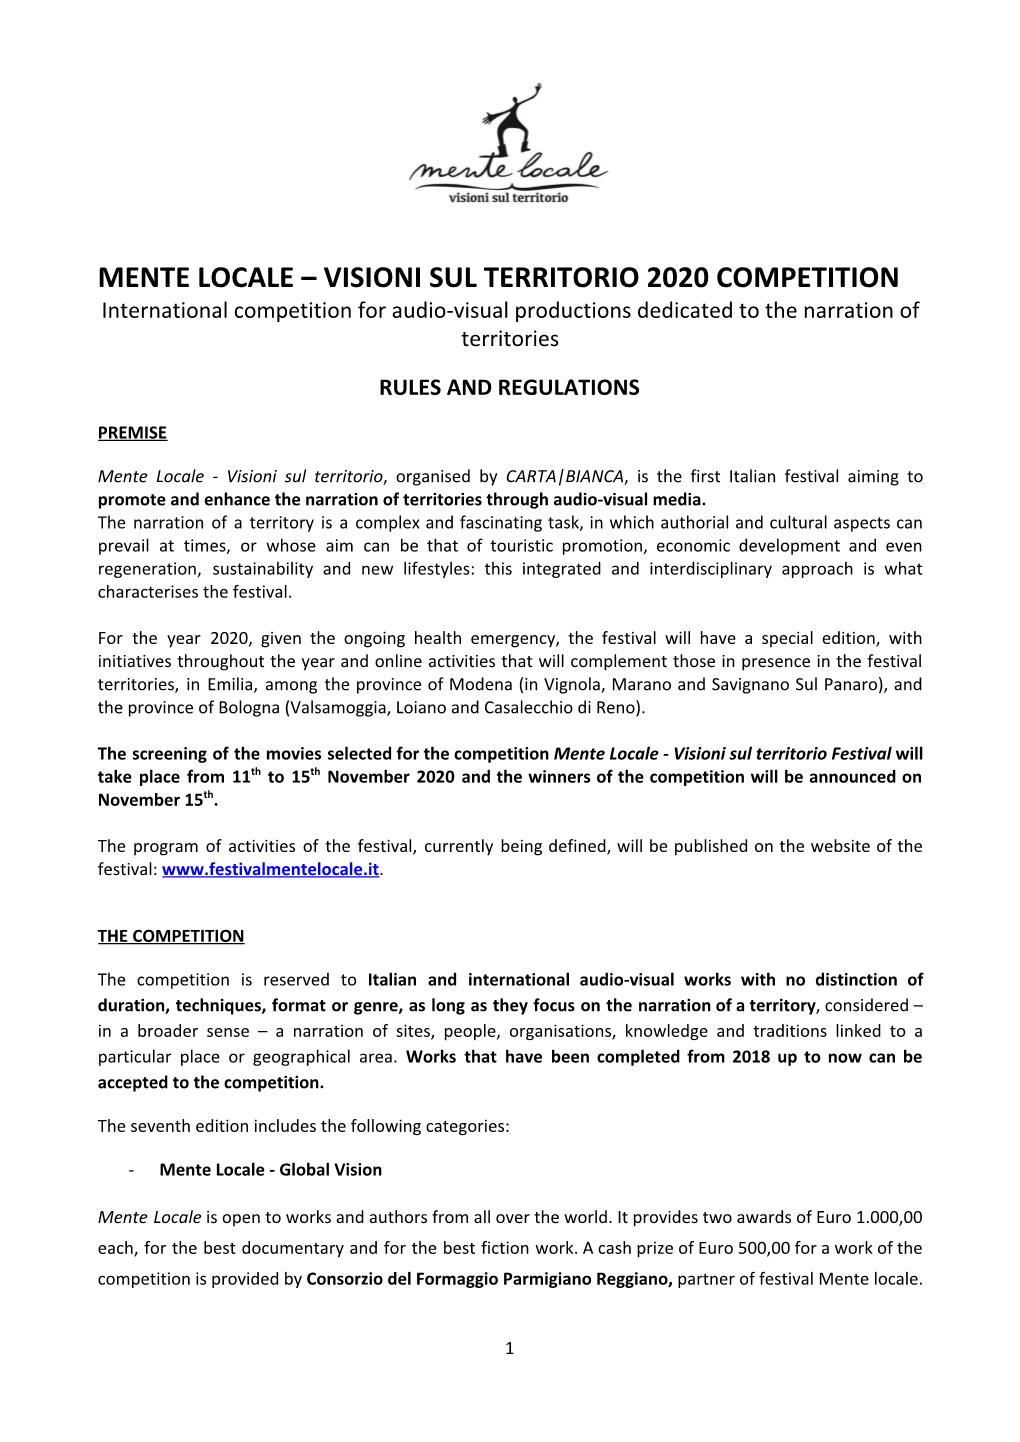 MENTE LOCALE – VISIONI SUL TERRITORIO 2020 COMPETITION International Competition for Audio-Visual Productions Dedicated to the Narration of Territories